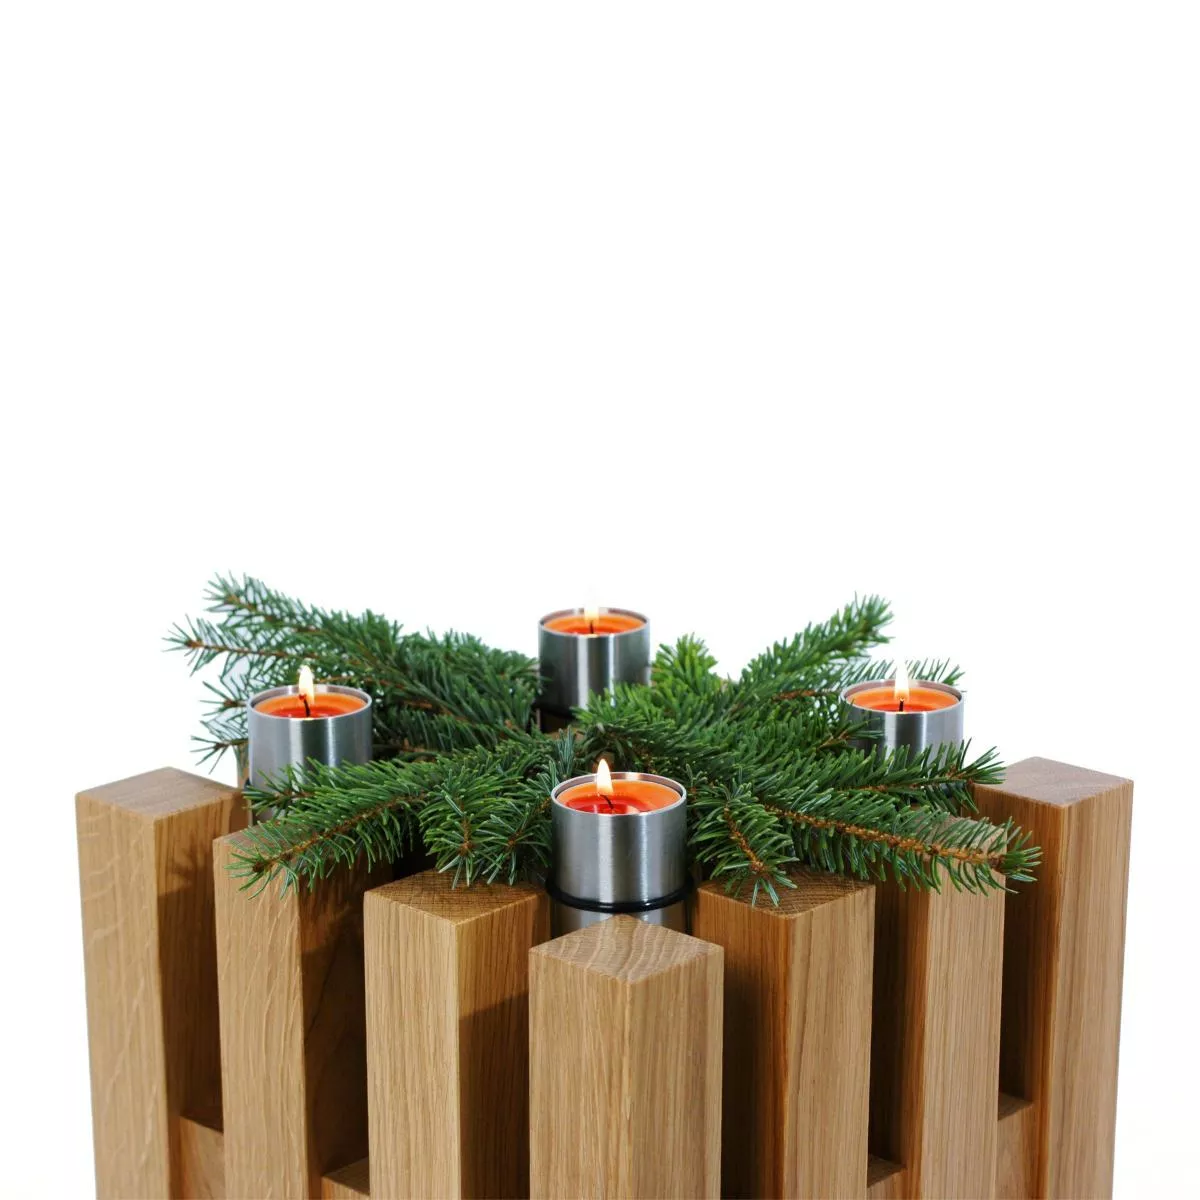 with candle holder (sold seperately)